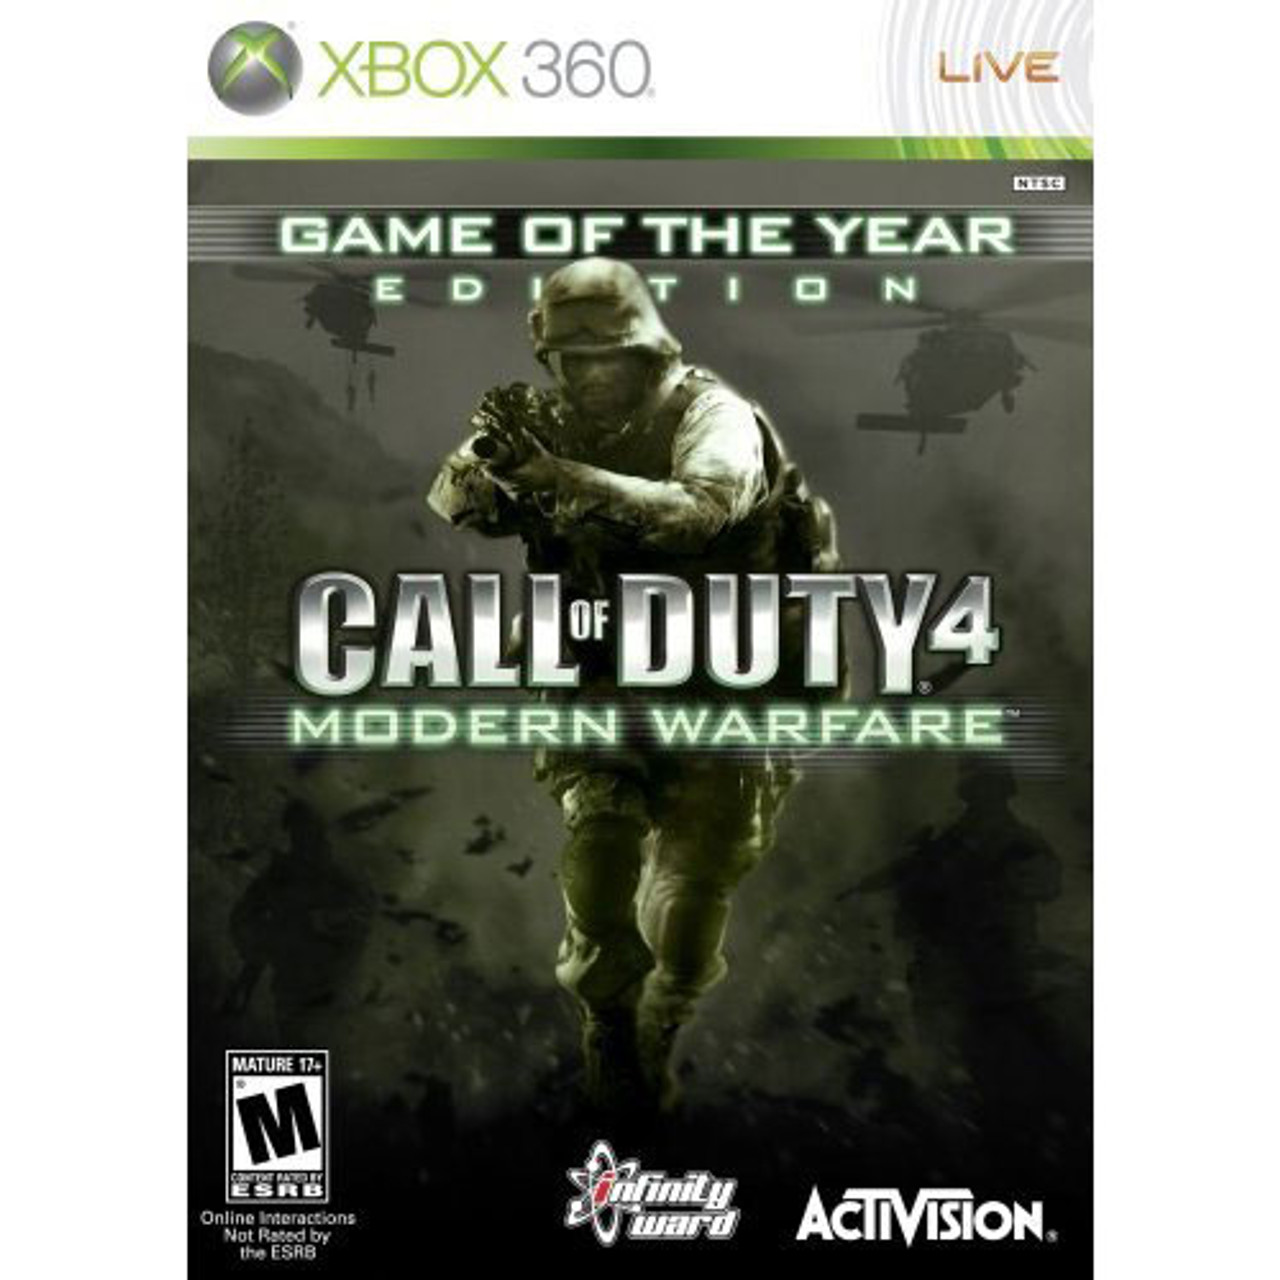 xbox 360 call of duty edition